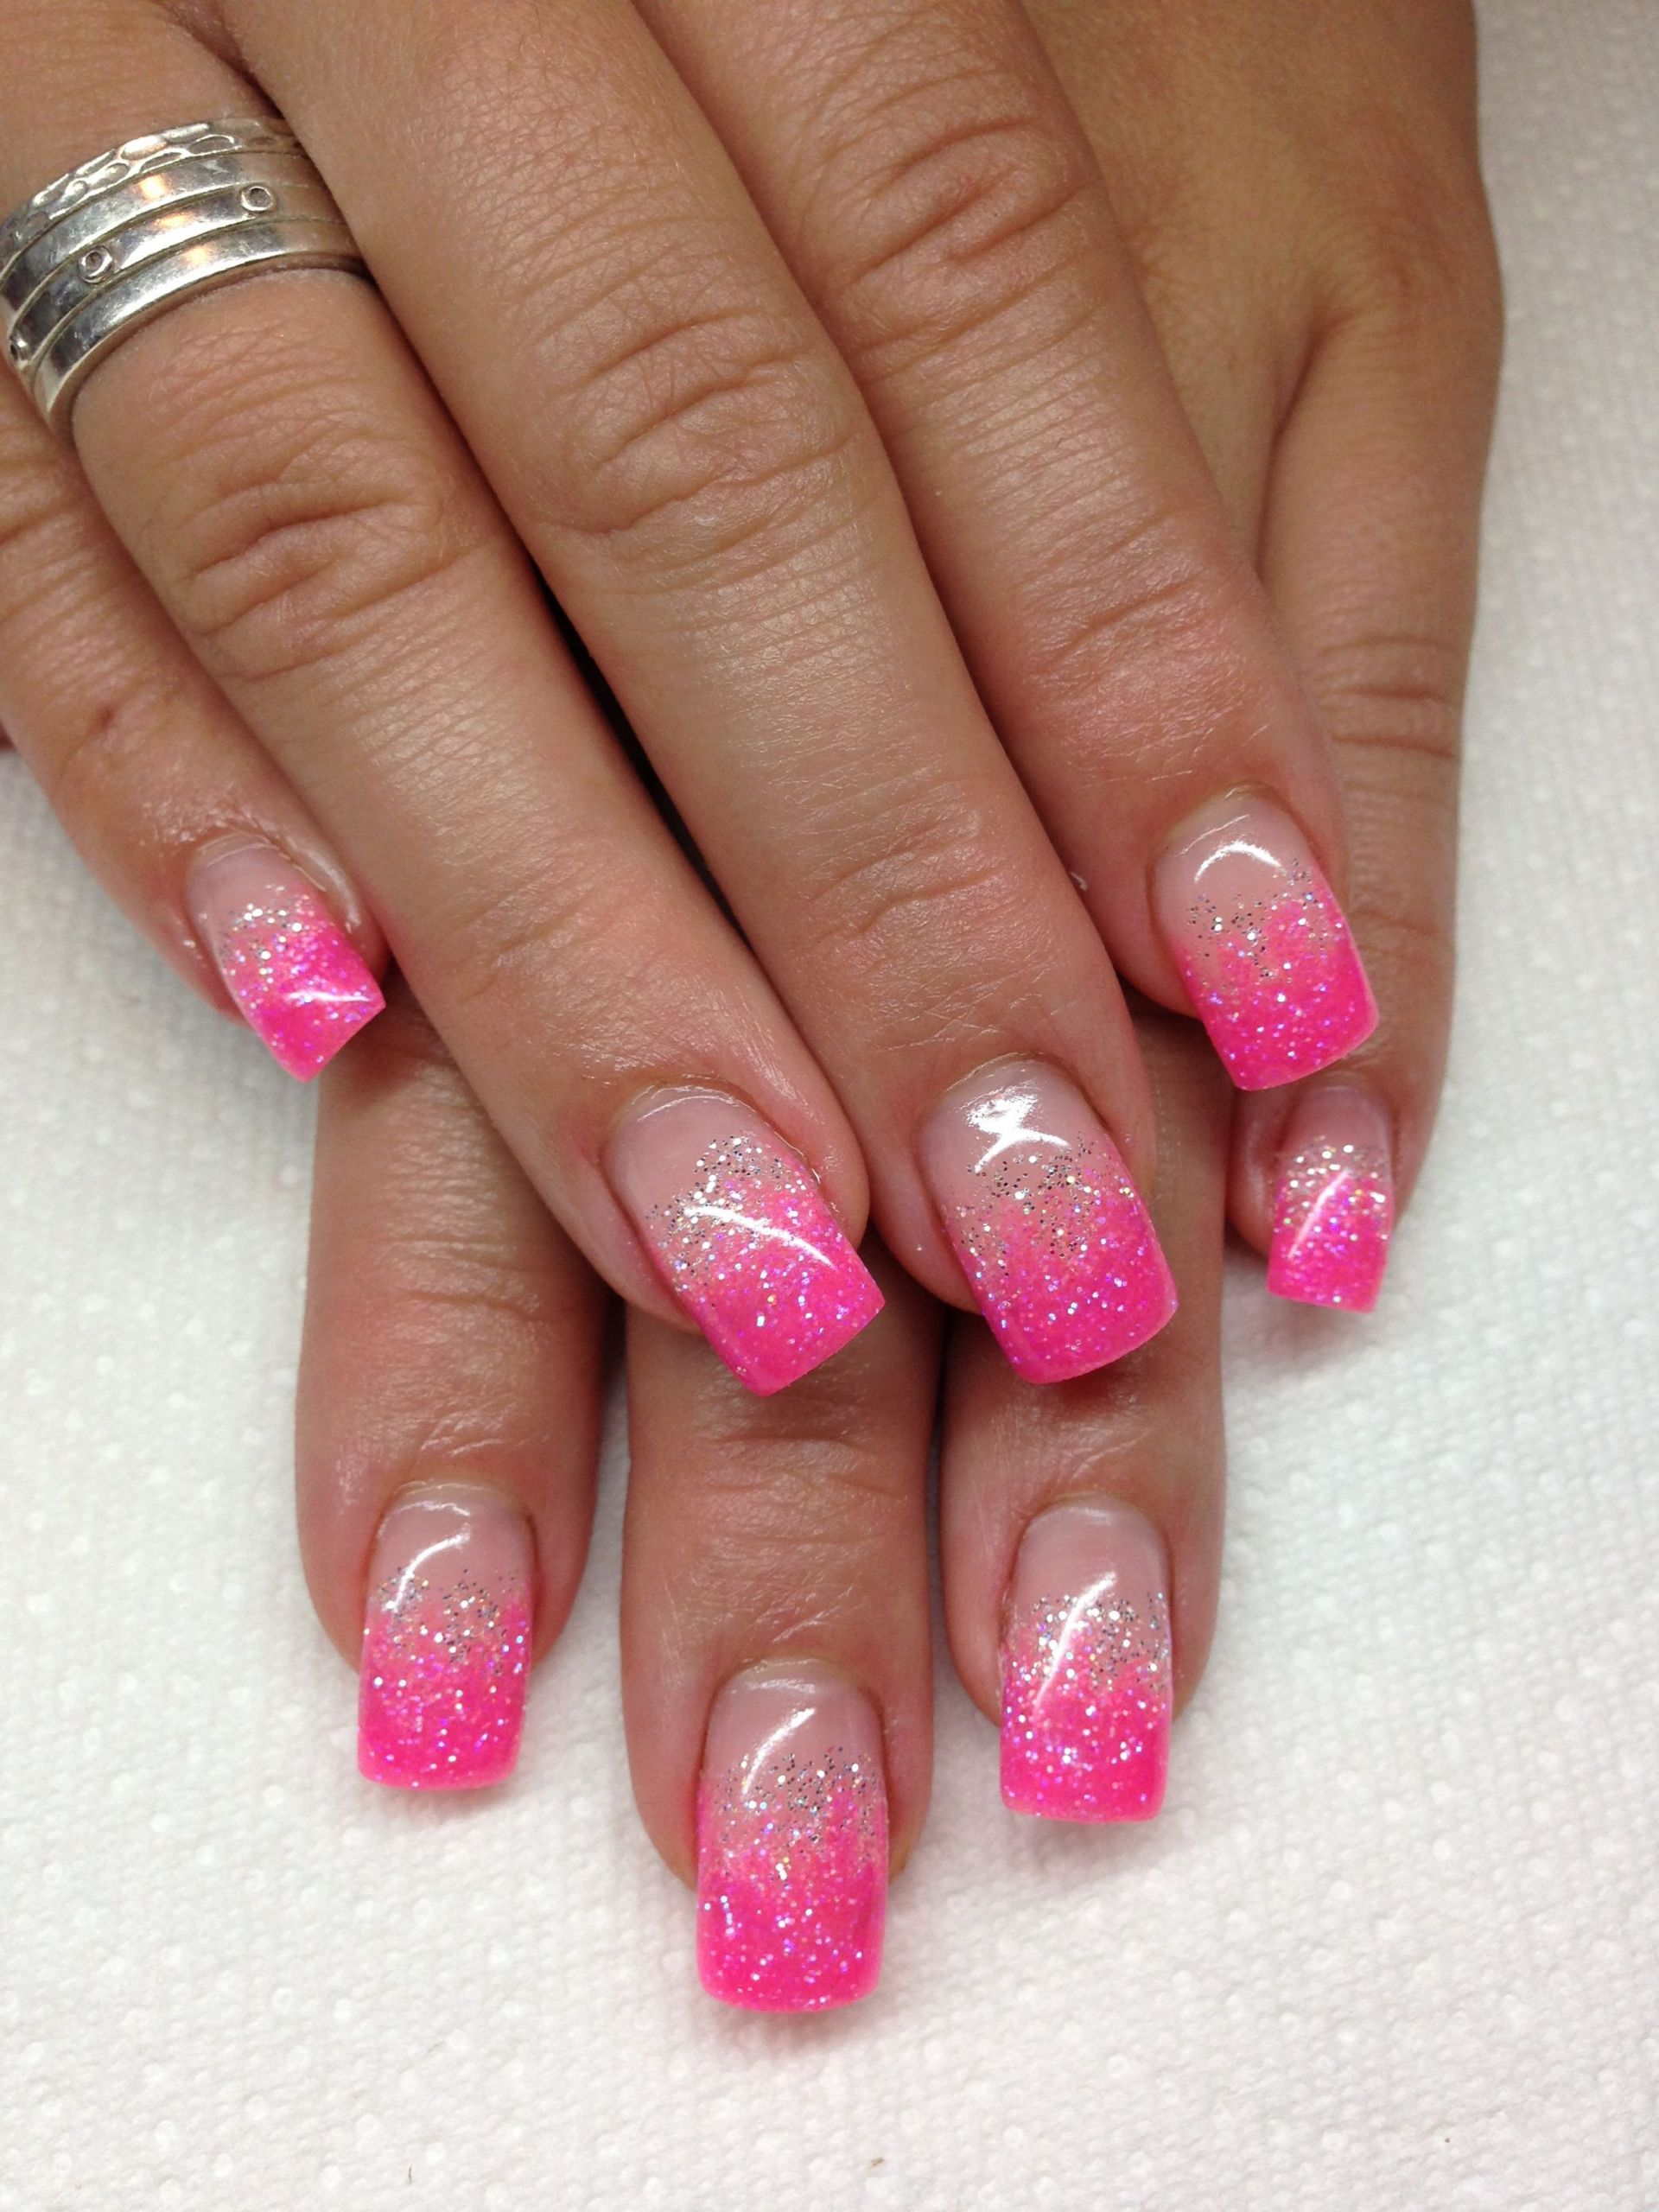 Nails Glitter Tips
 I love the pink and glitter tips